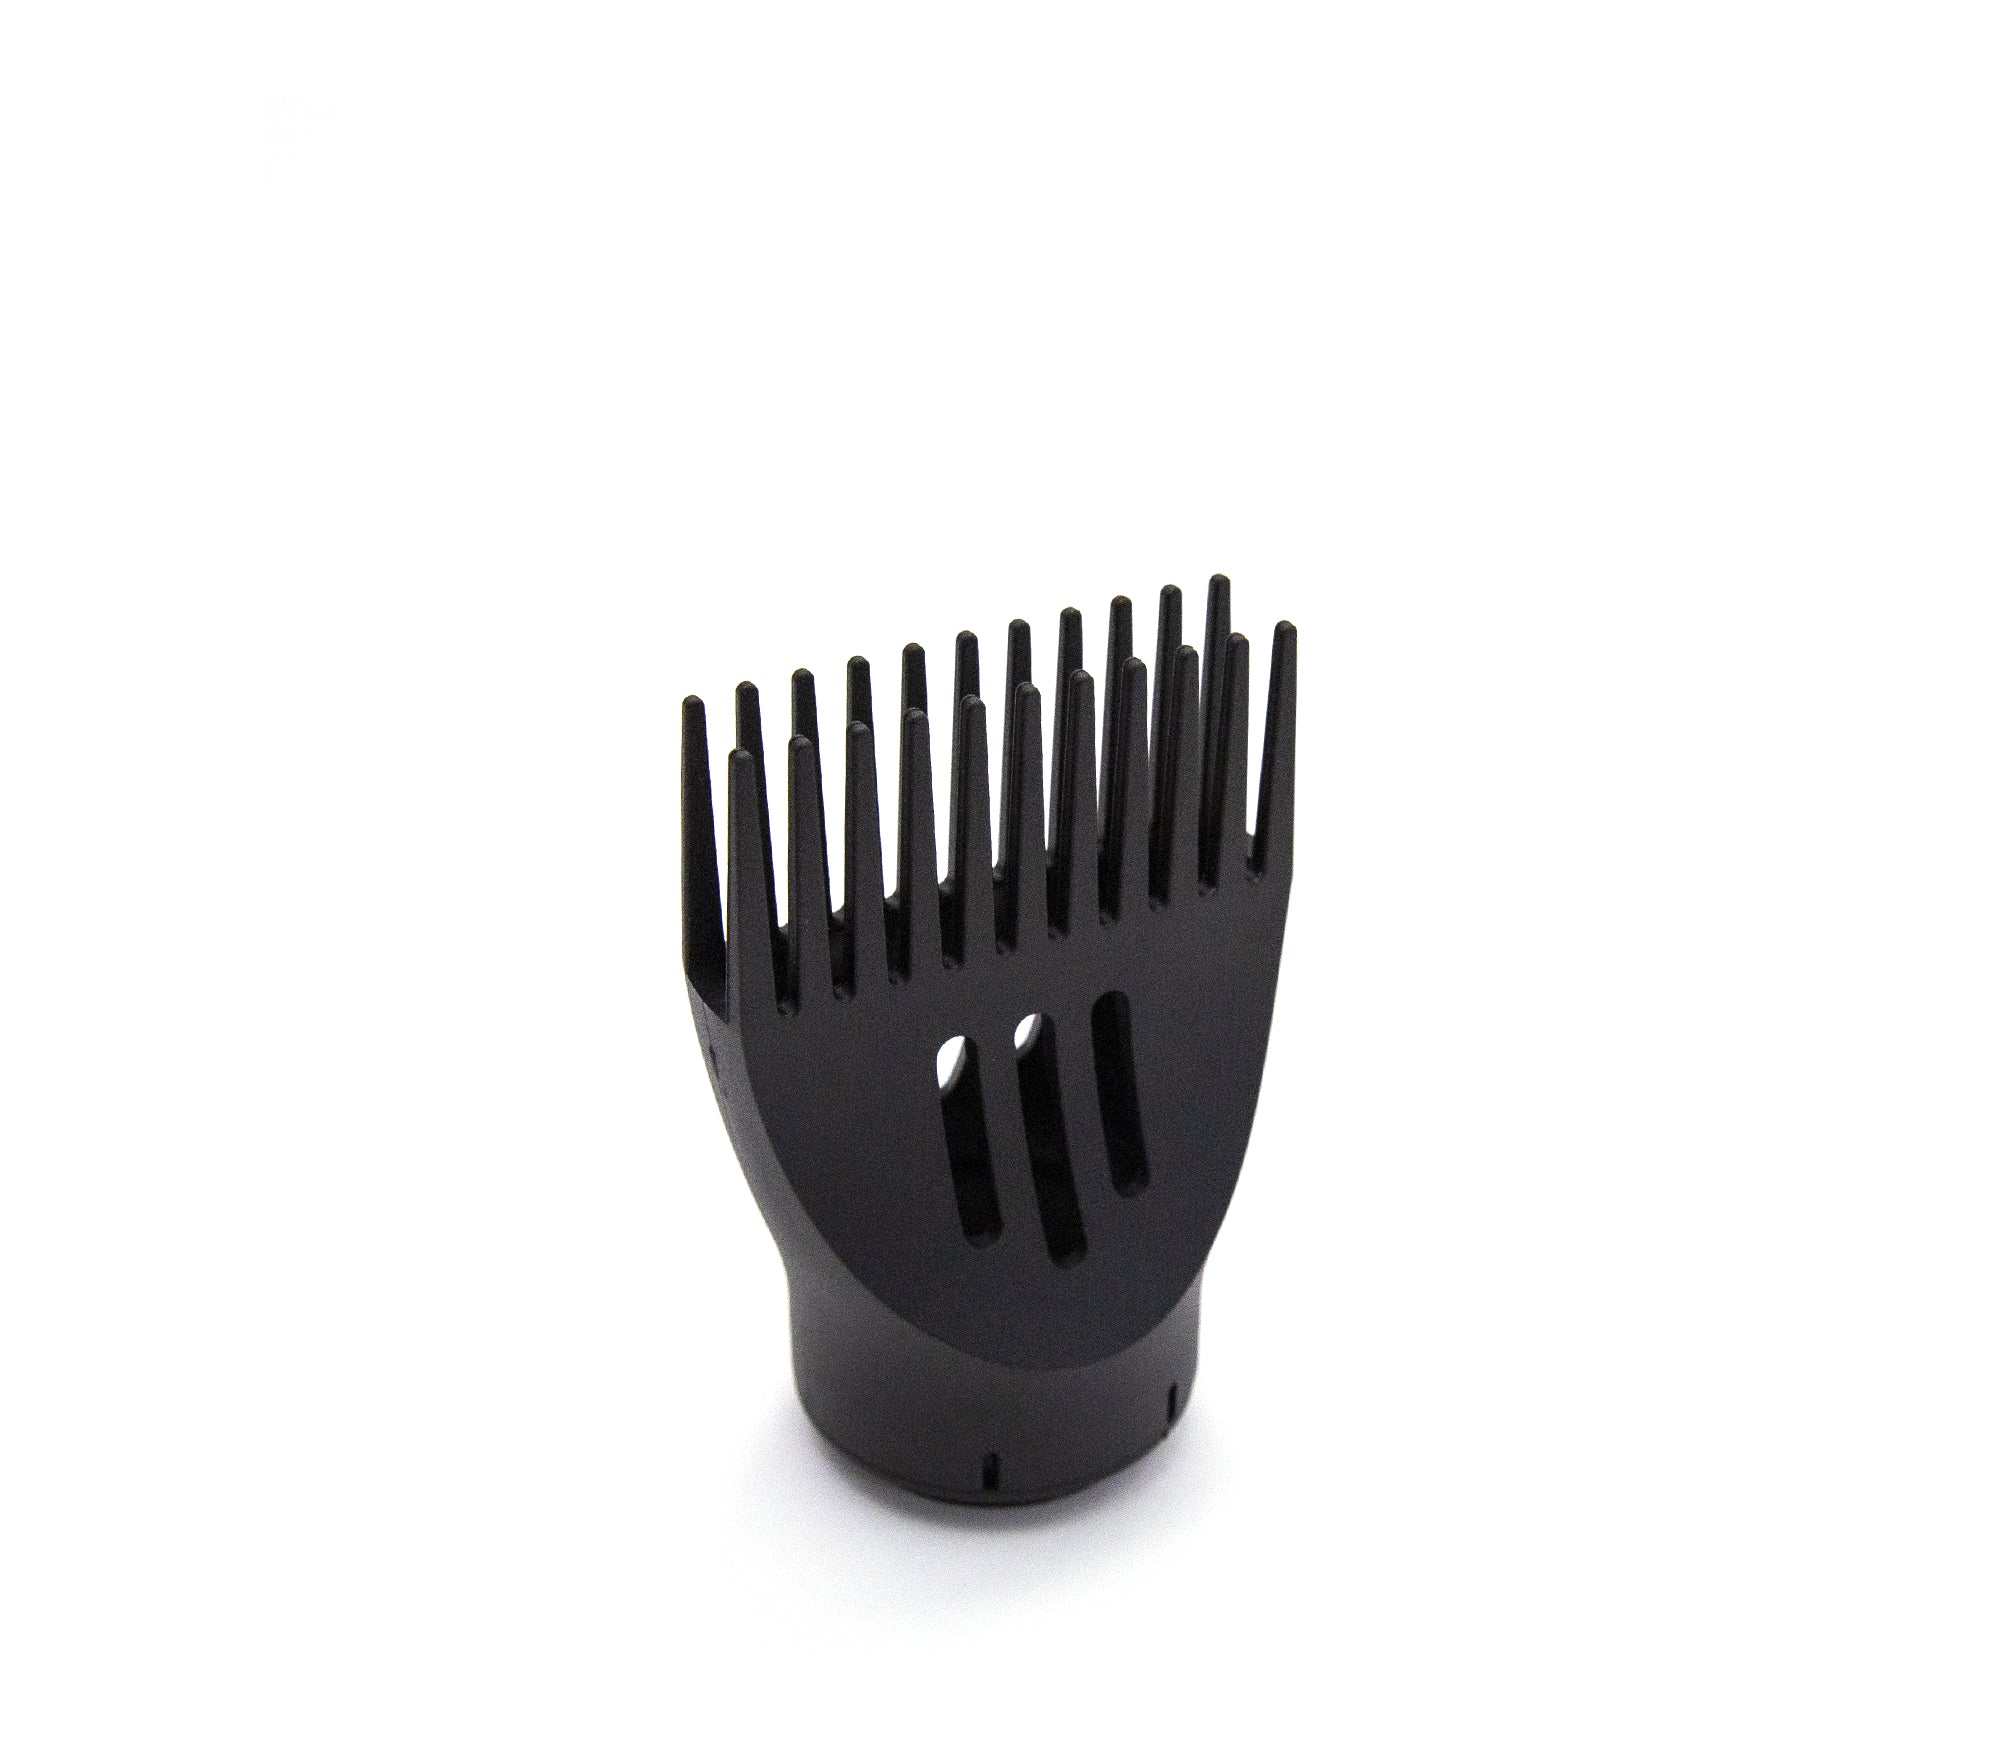 Segbeauty Hair Diffuser Dryer Comb Attachment Hair Blower Concentrator  Nozzle Brush Attachments Hairdressing Styling Salon Tool  Styling  Accessories  AliExpress